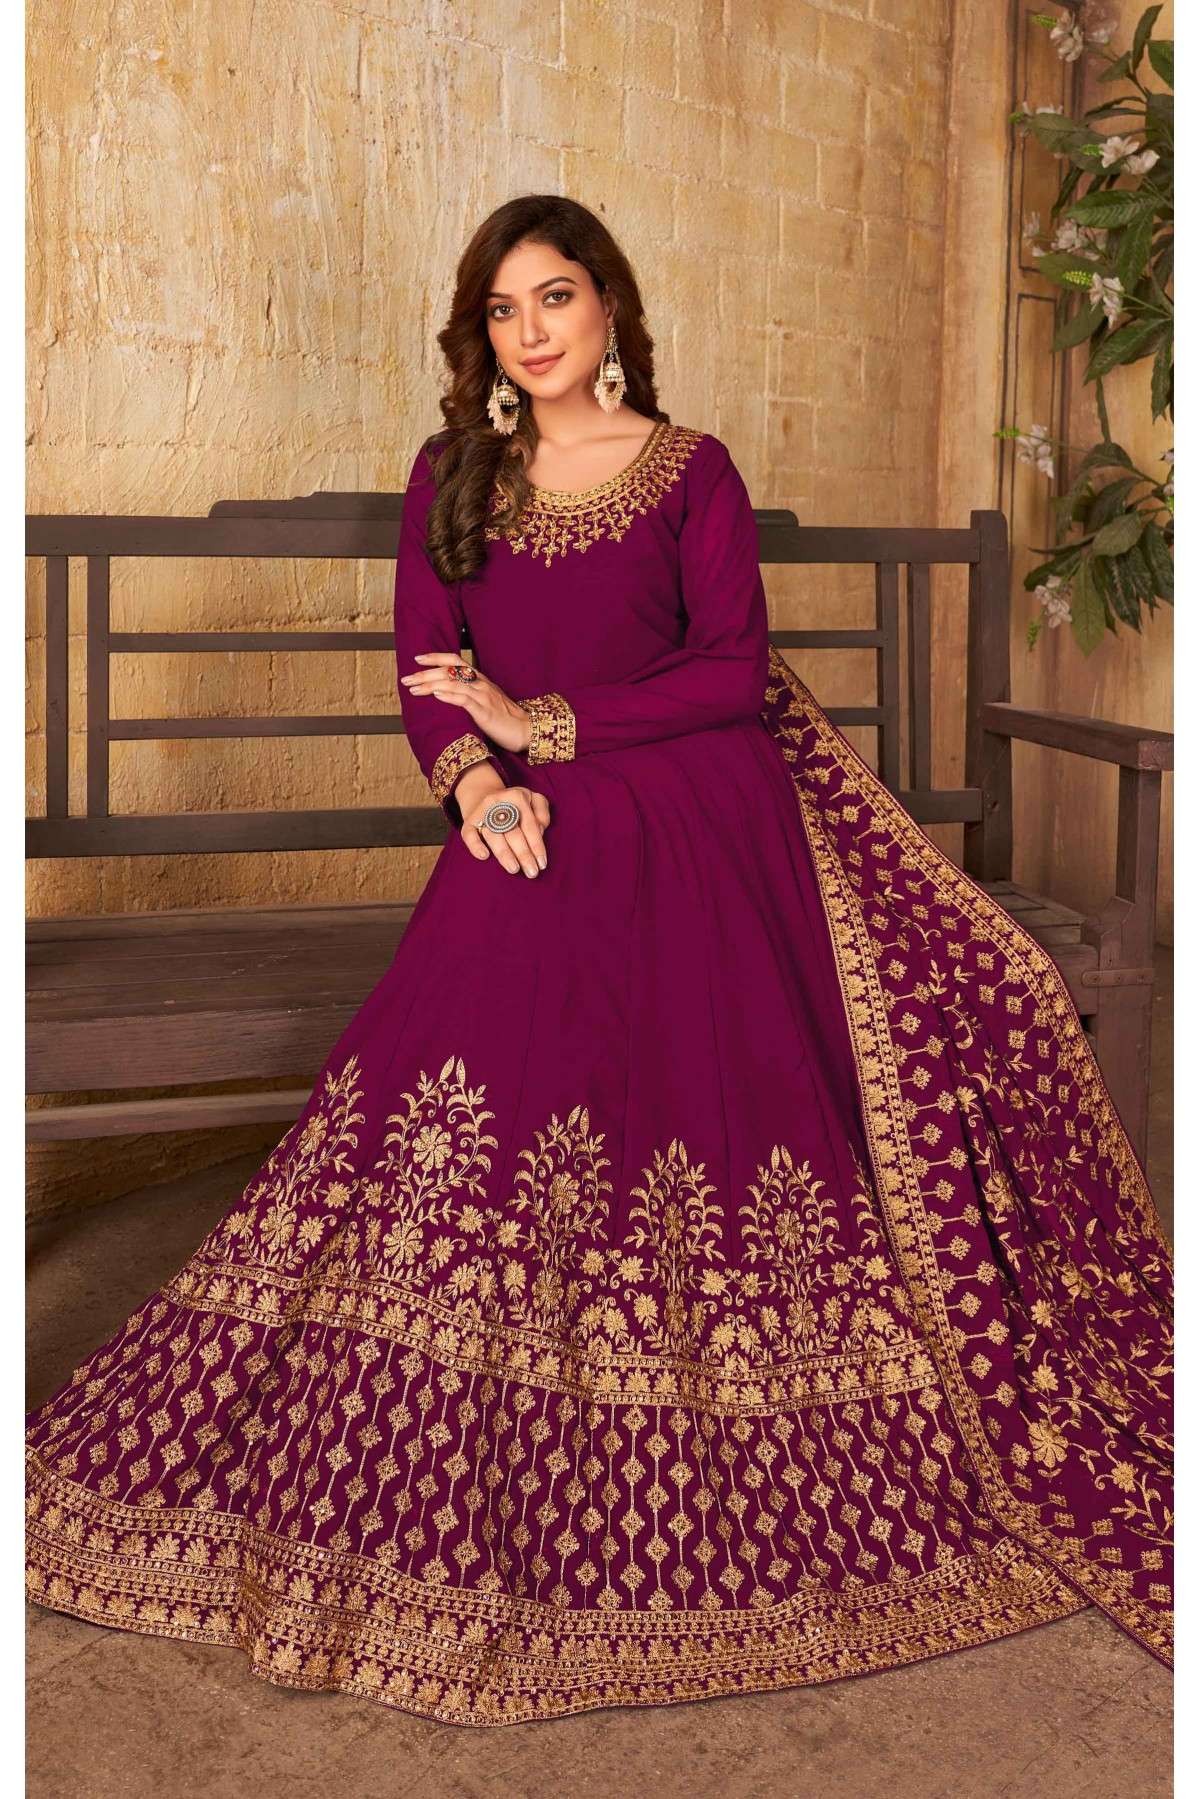 Faux Georgette Embroidery Anarkali Suit In Magenta Pink Colour - SM5415994